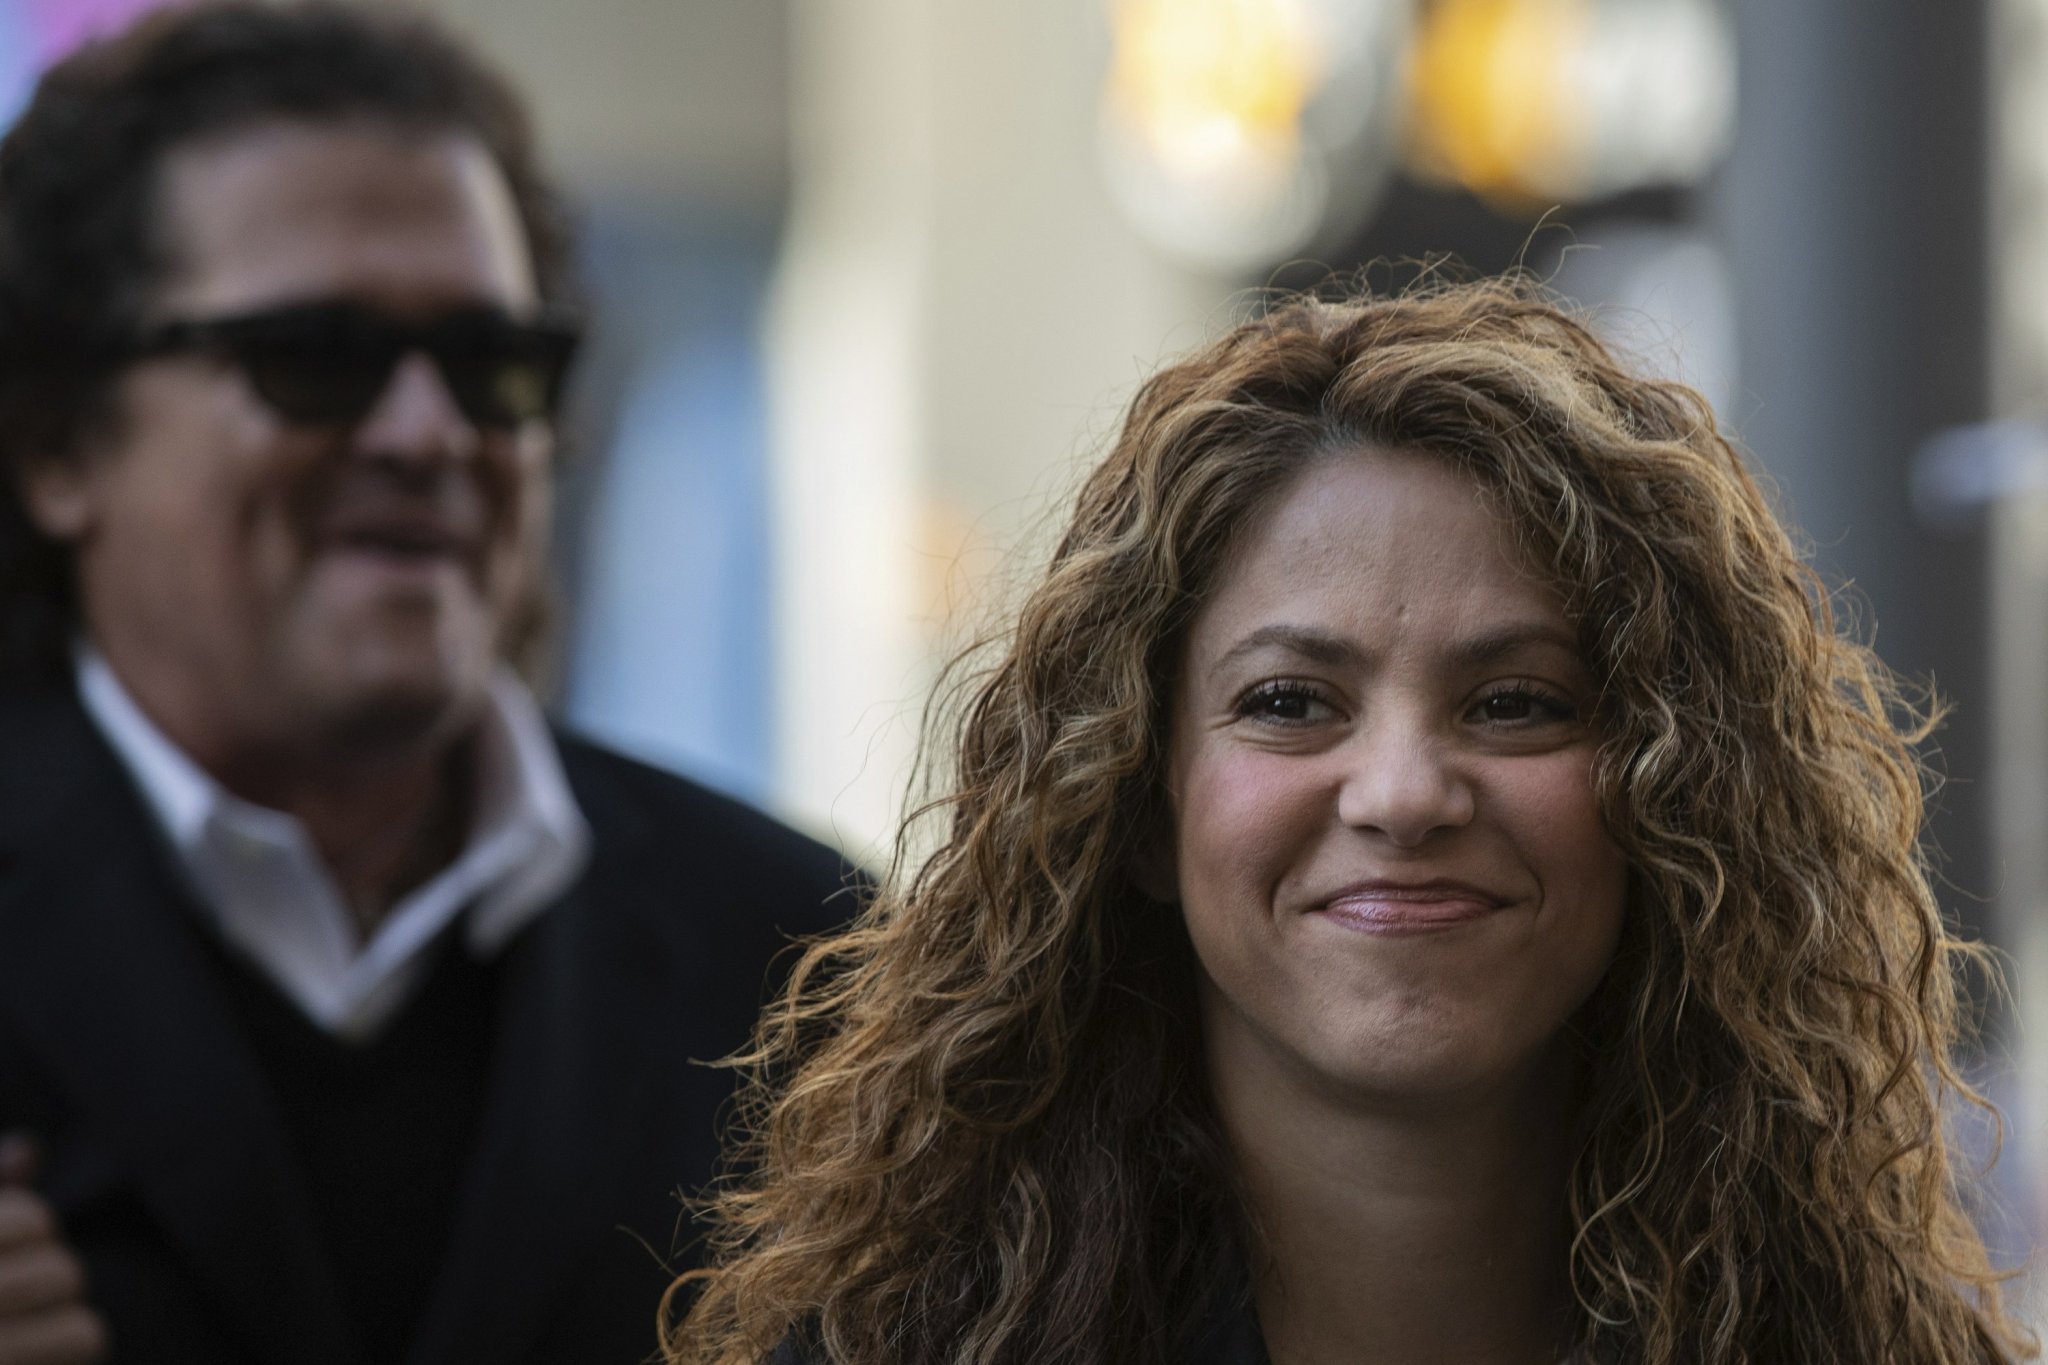 Spanish court clears Shakira, Vives of plagiarism